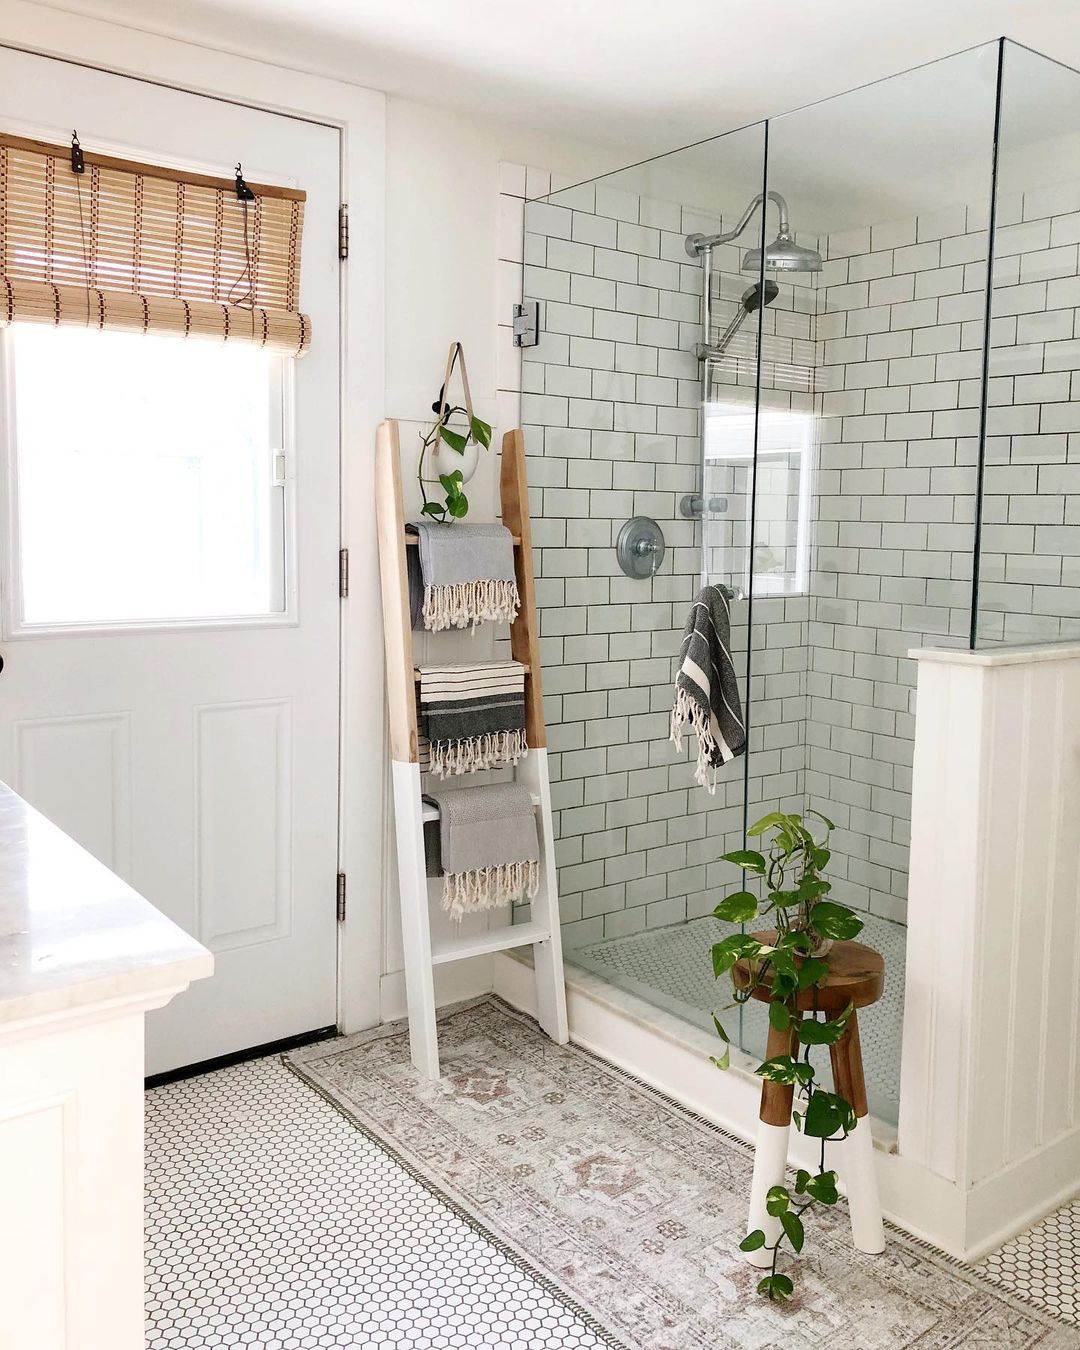 a bathroom towel rack repurposed from an old wooden ladder in a bathroom provides ample towel storage while impacting as little floor space as possible